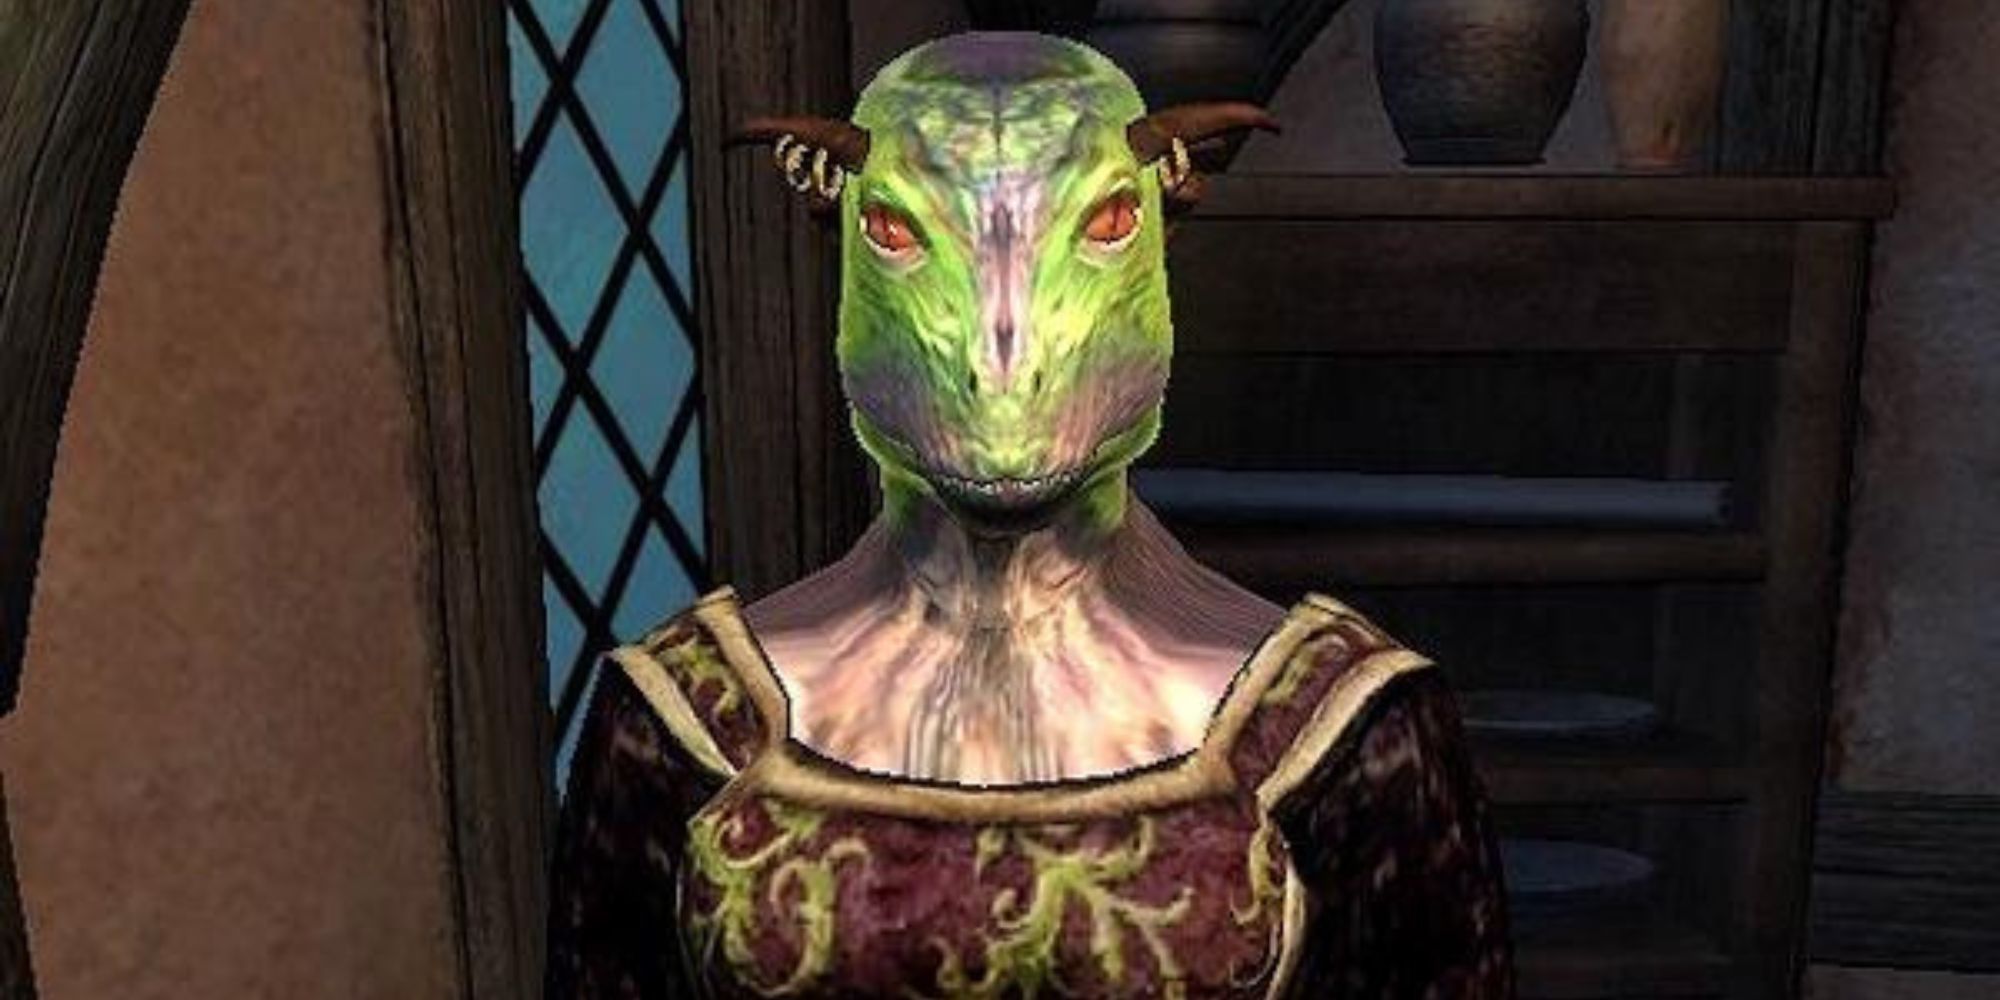 close up of Seed-Neeus from The Elder Scrolls 4: Oblivion